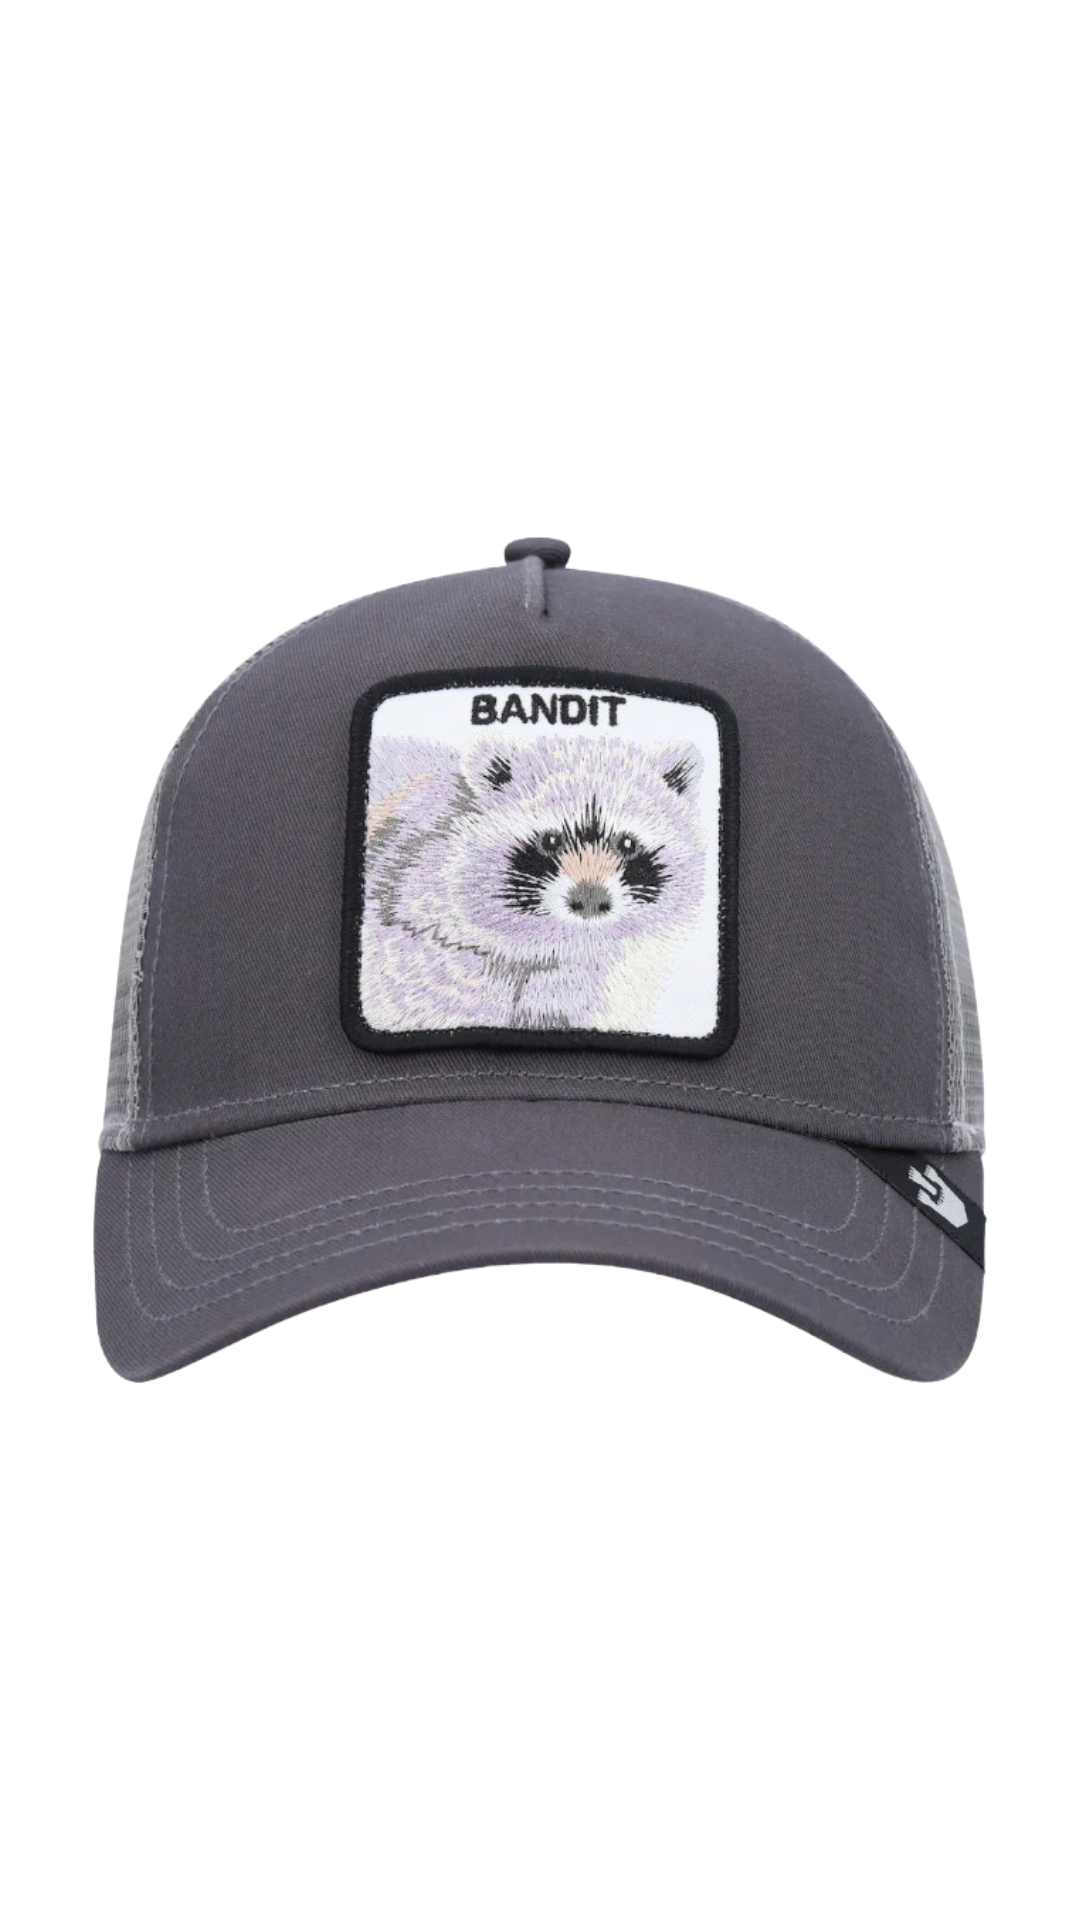 GRY The Bandit Hat